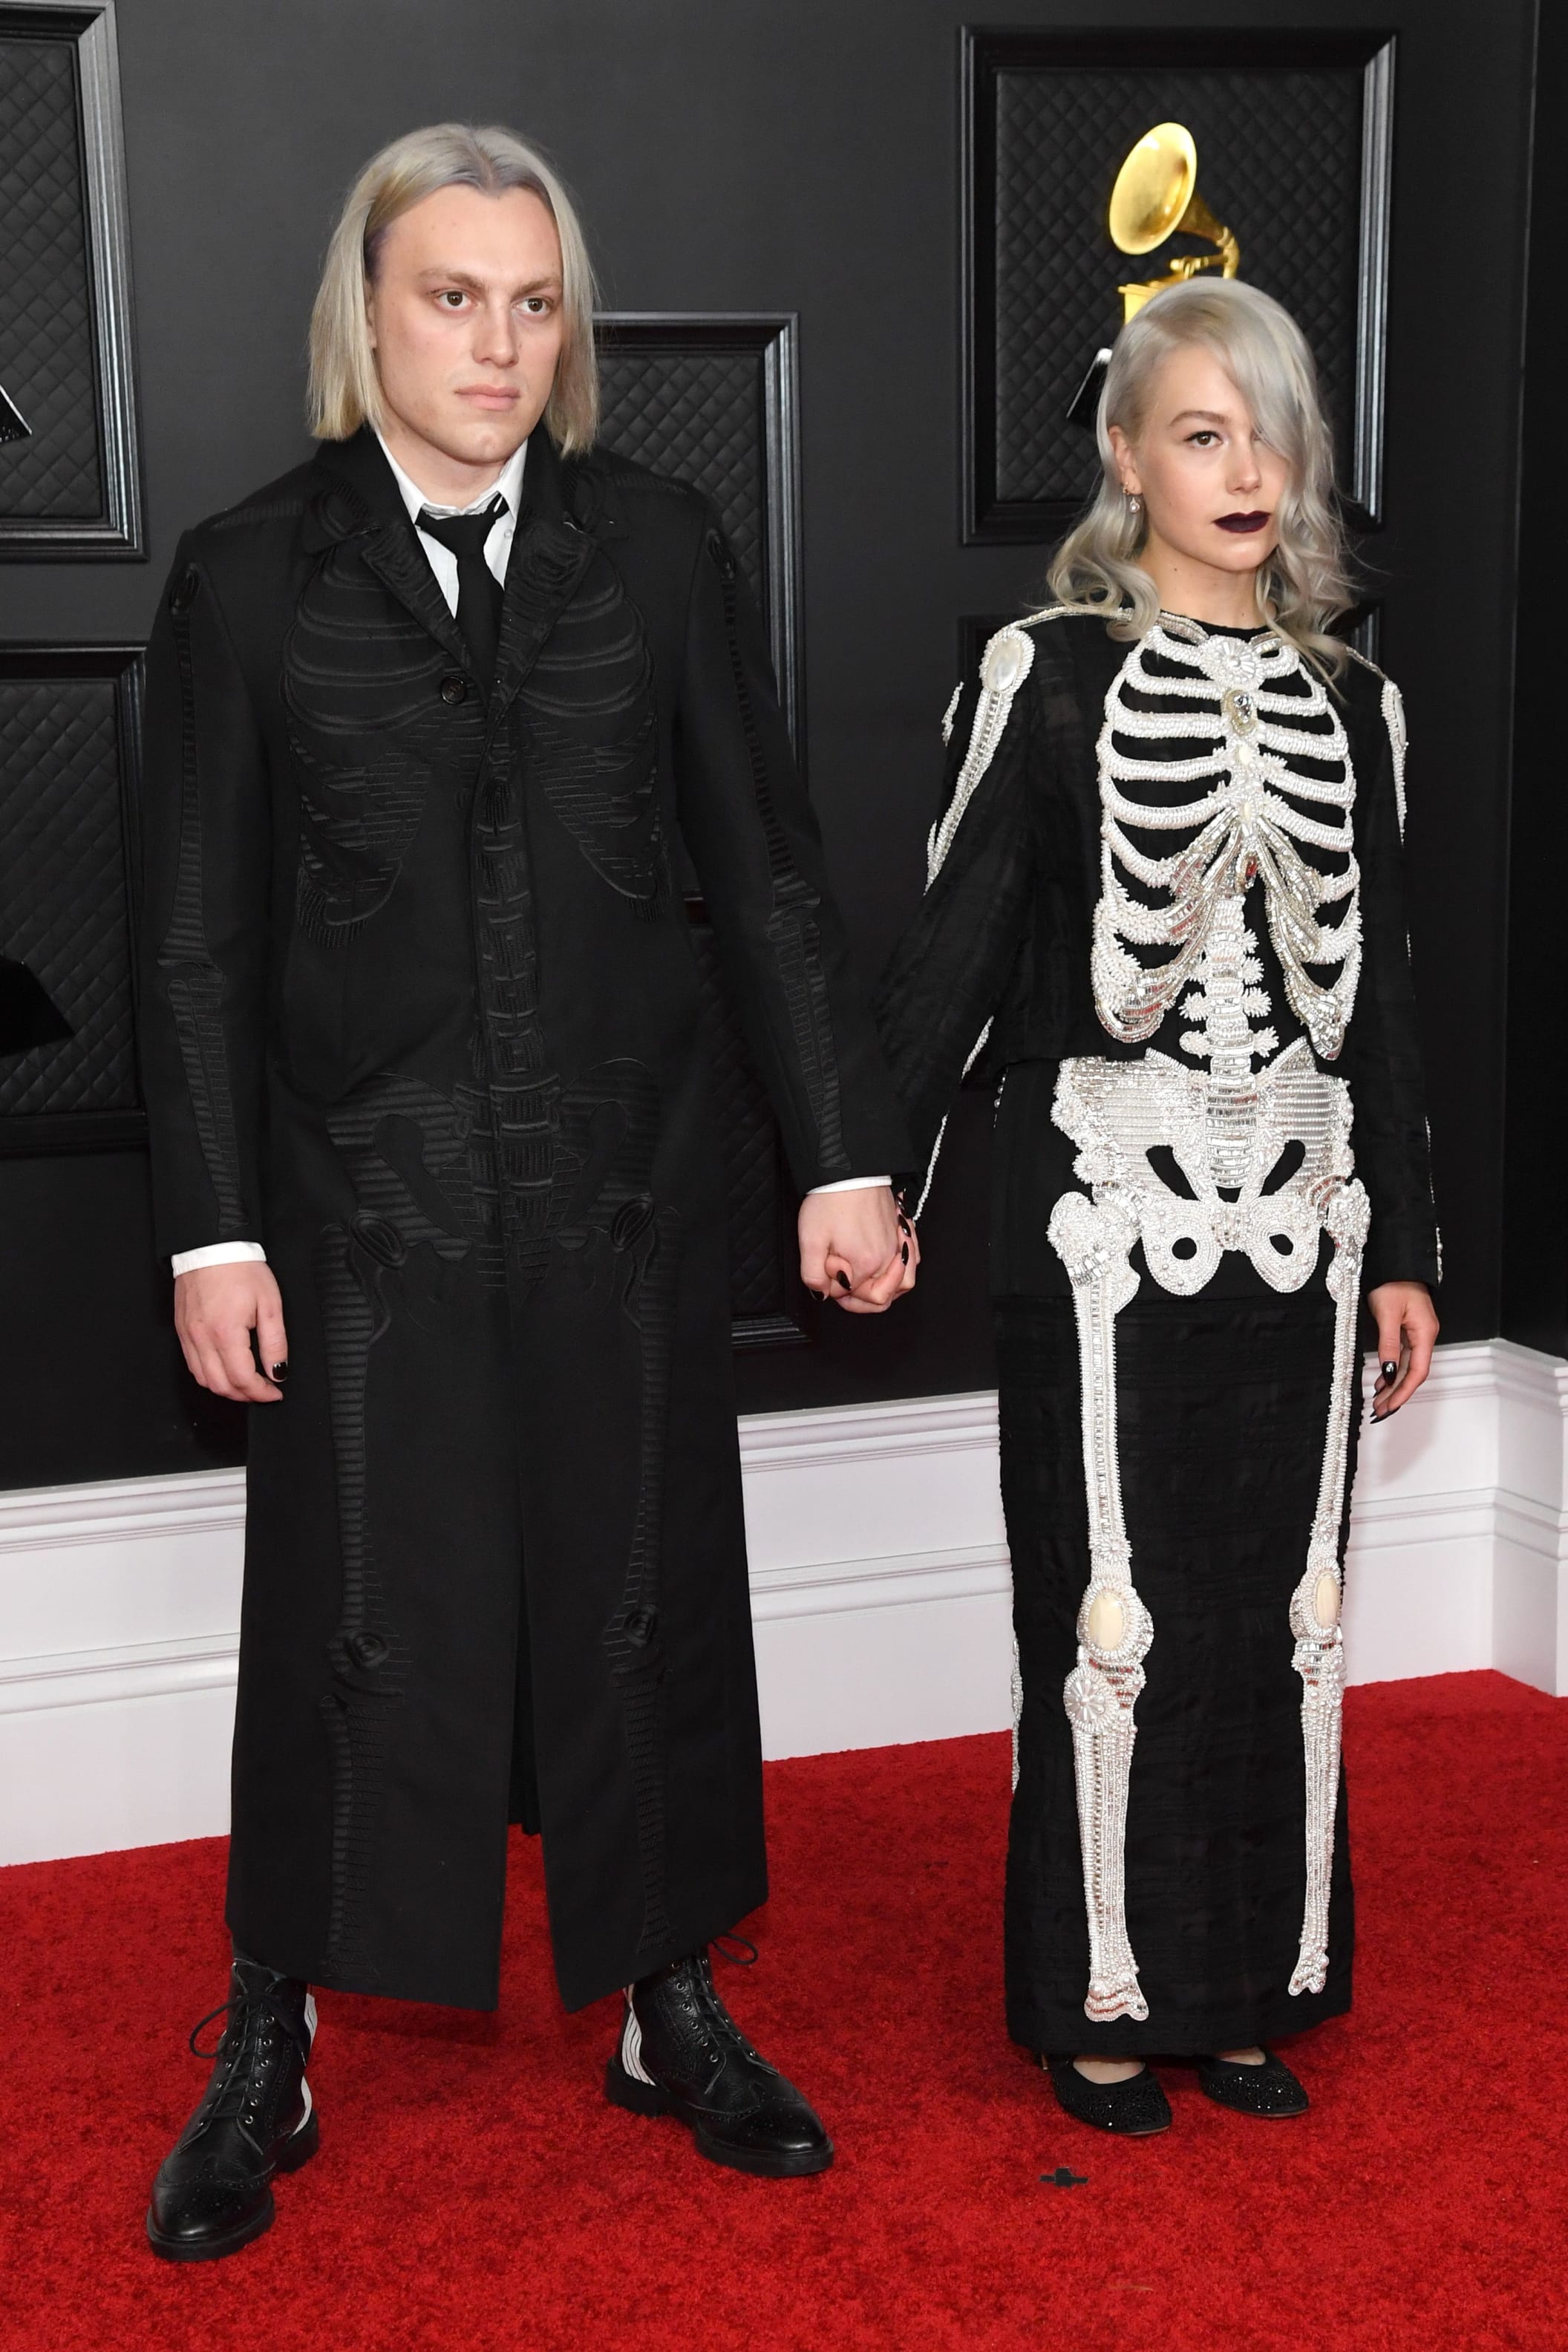 Phoebe Bridgers and her brother at the Grammys